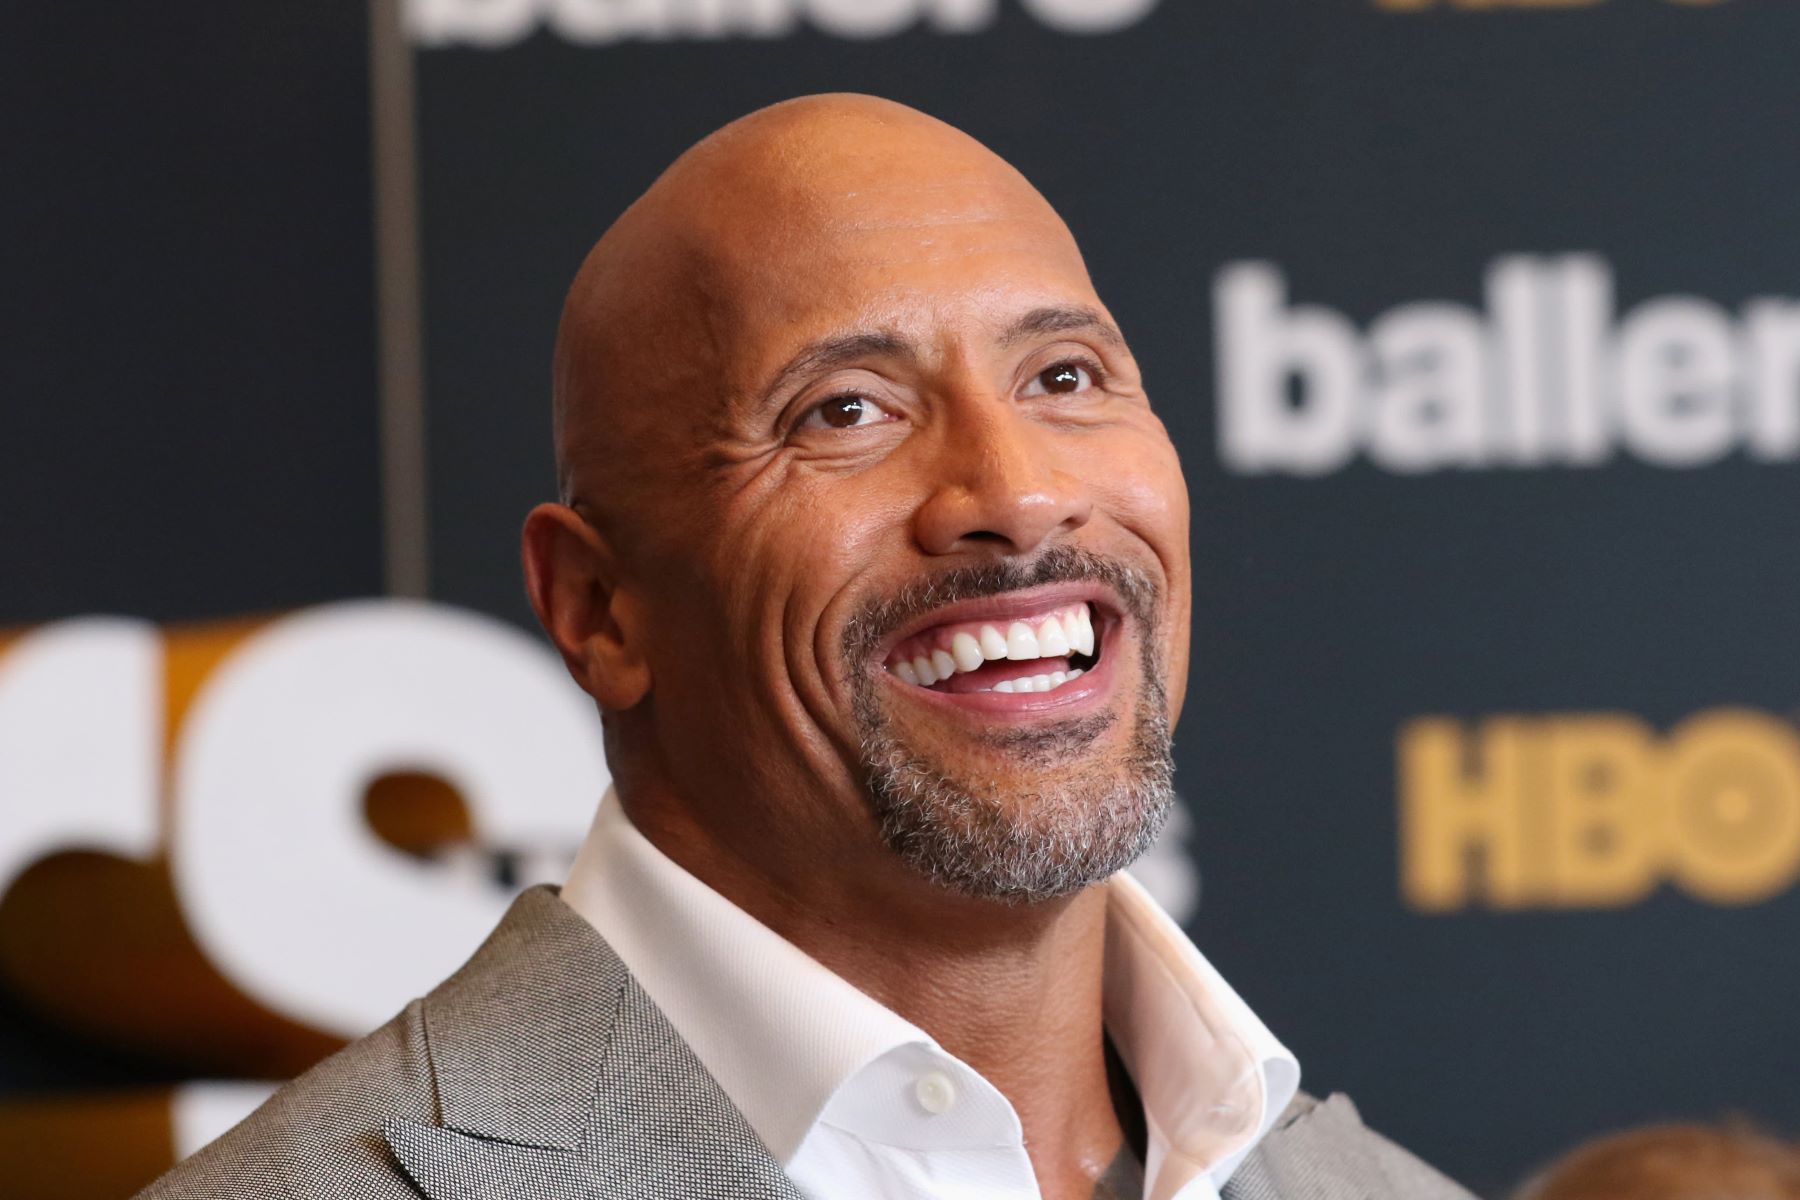 Dwayne “The Rock” Johnson Makes Epic Return To WWE After 4 Years